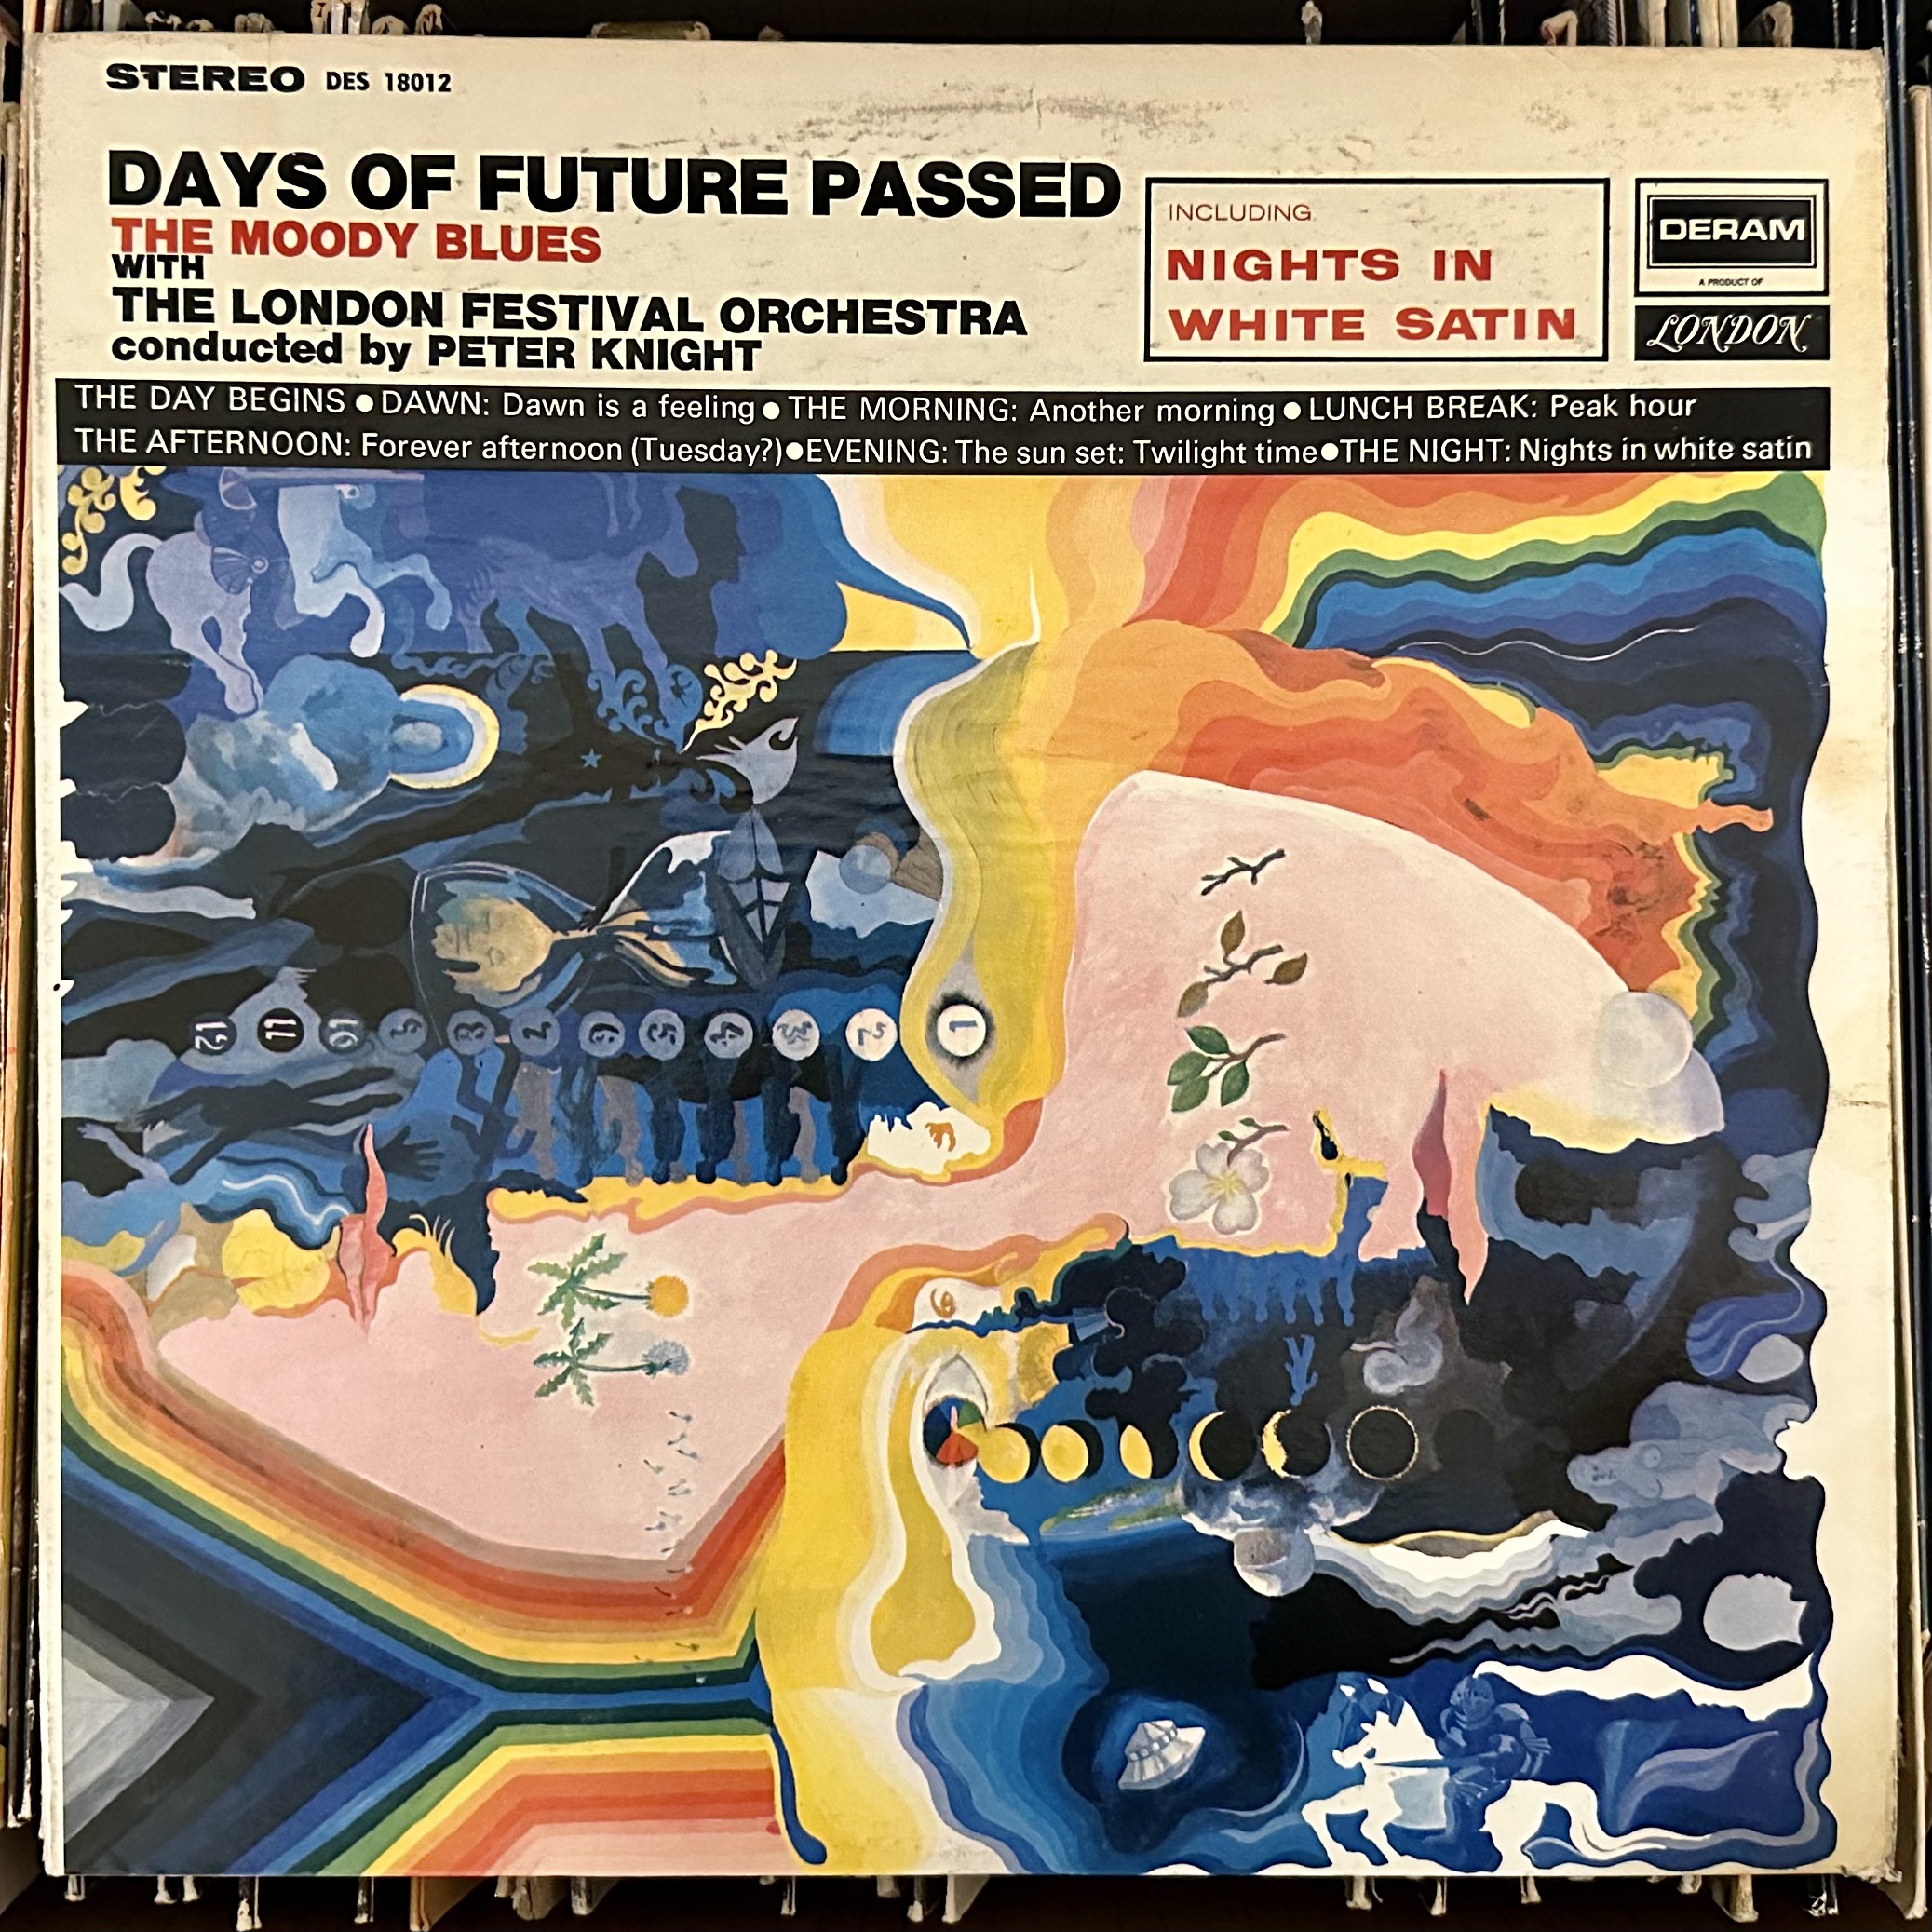 Days of Future Passed by The Moody Blues